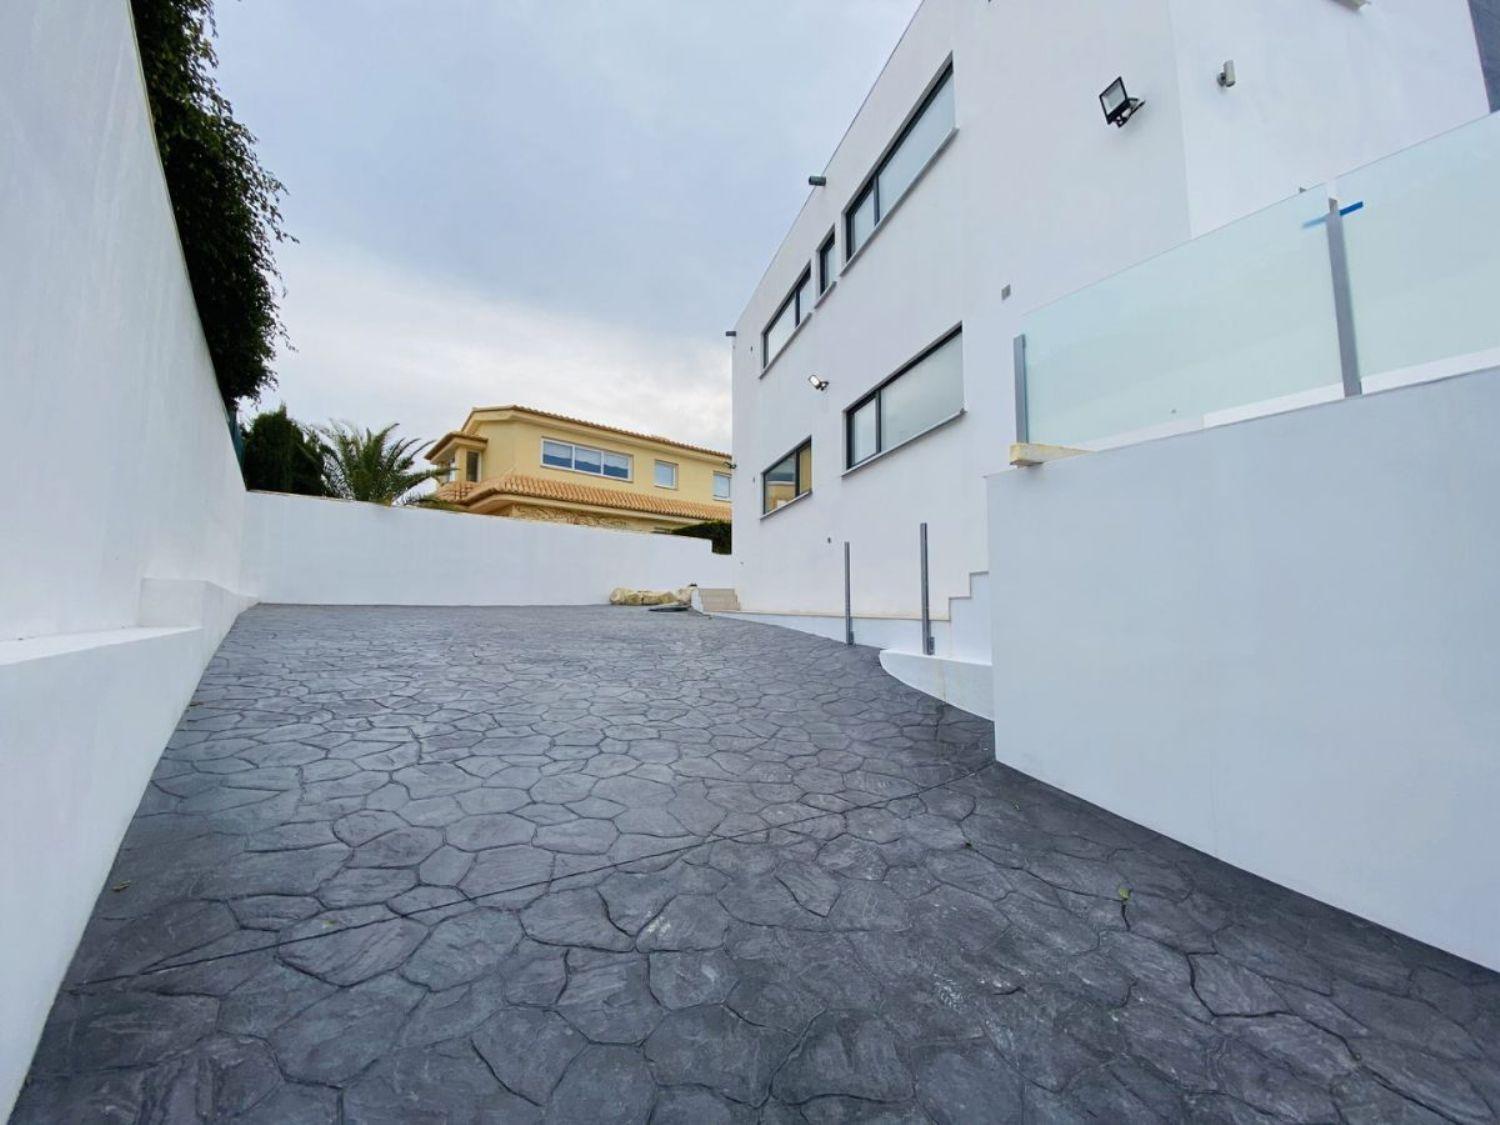 For sale a beautiful bioclimatic villa newly built.